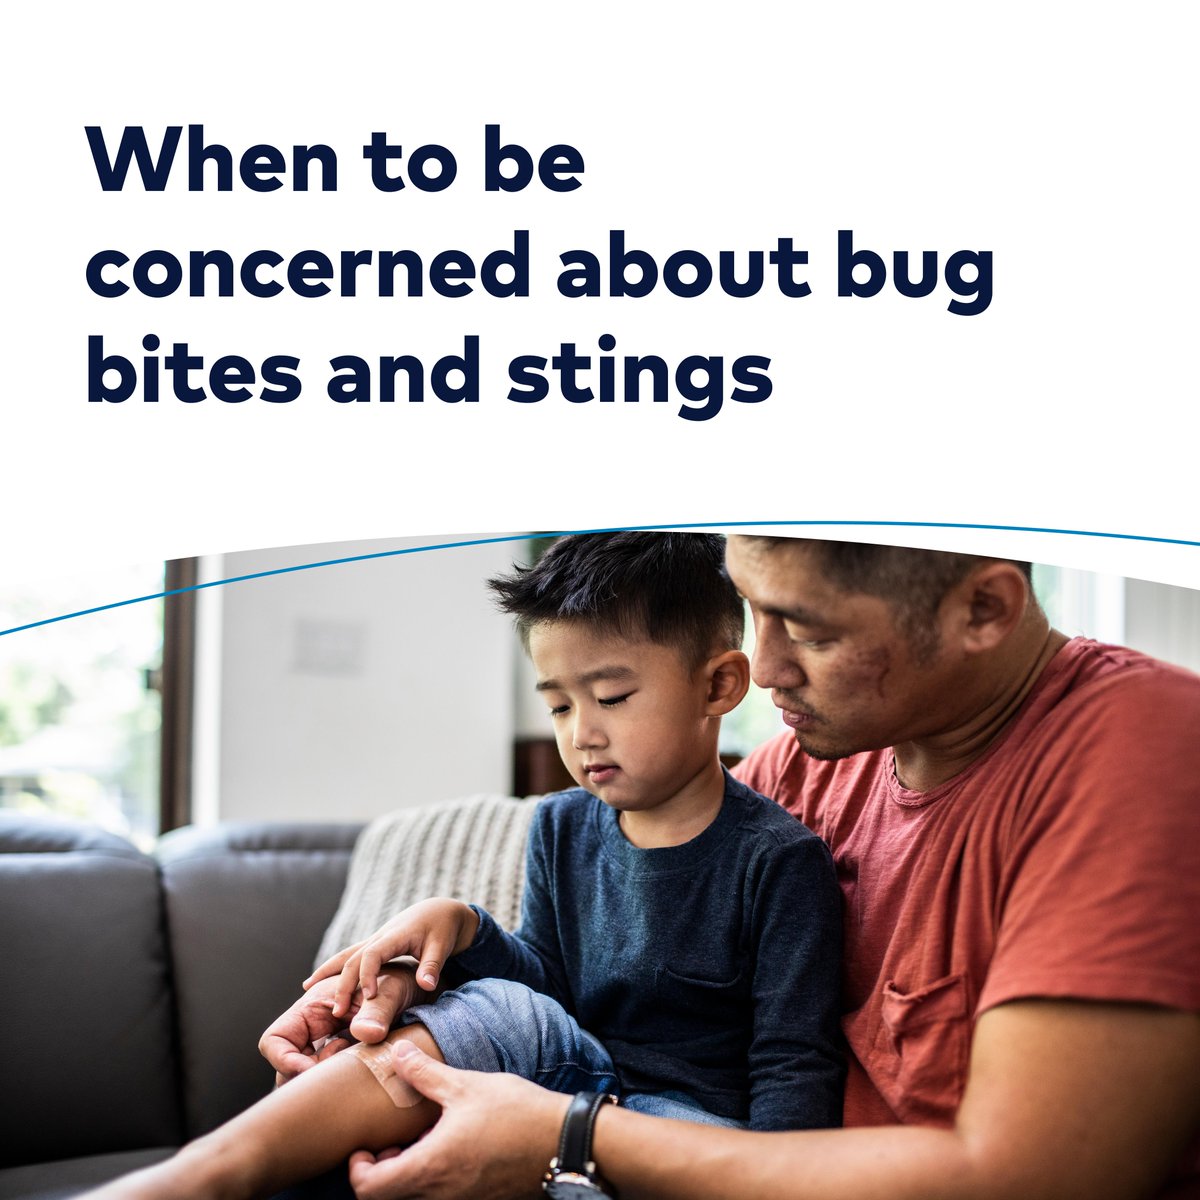 A fun day outdoors can easily be spoiled by bug bites & stings. While some can be treated at home, it’s wise to know when medical attention is necessary. Get tips to prevent bites & stings, learn how to spot dangerous reactions & more: gsmed.co/BitesAndStings… #ImproveMoreLives